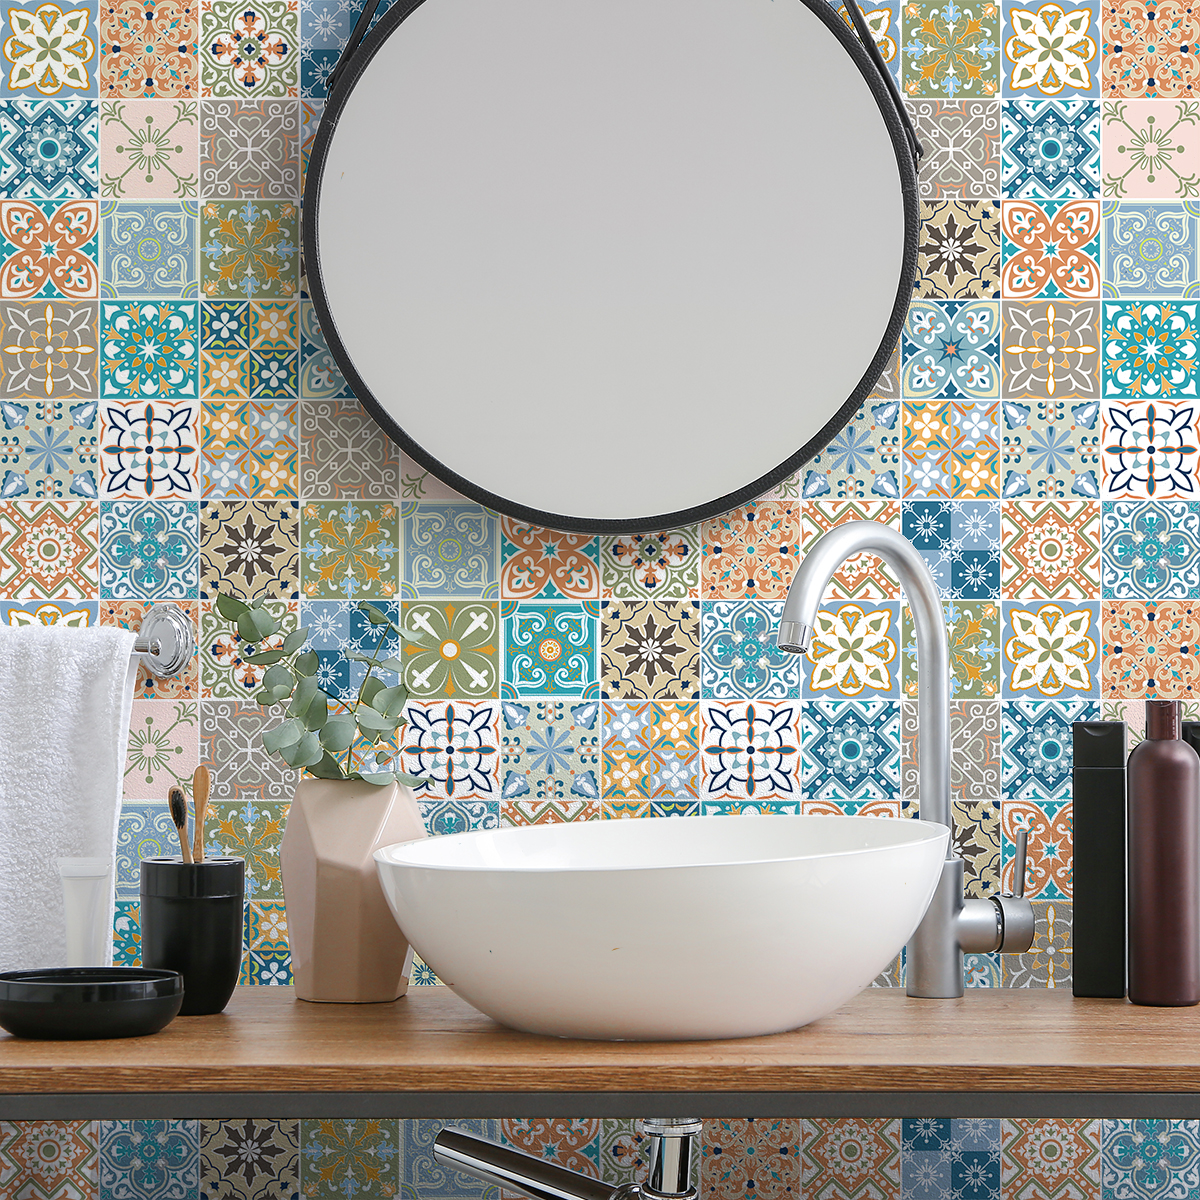 60 wall stickers cement tiles azulejos florensia